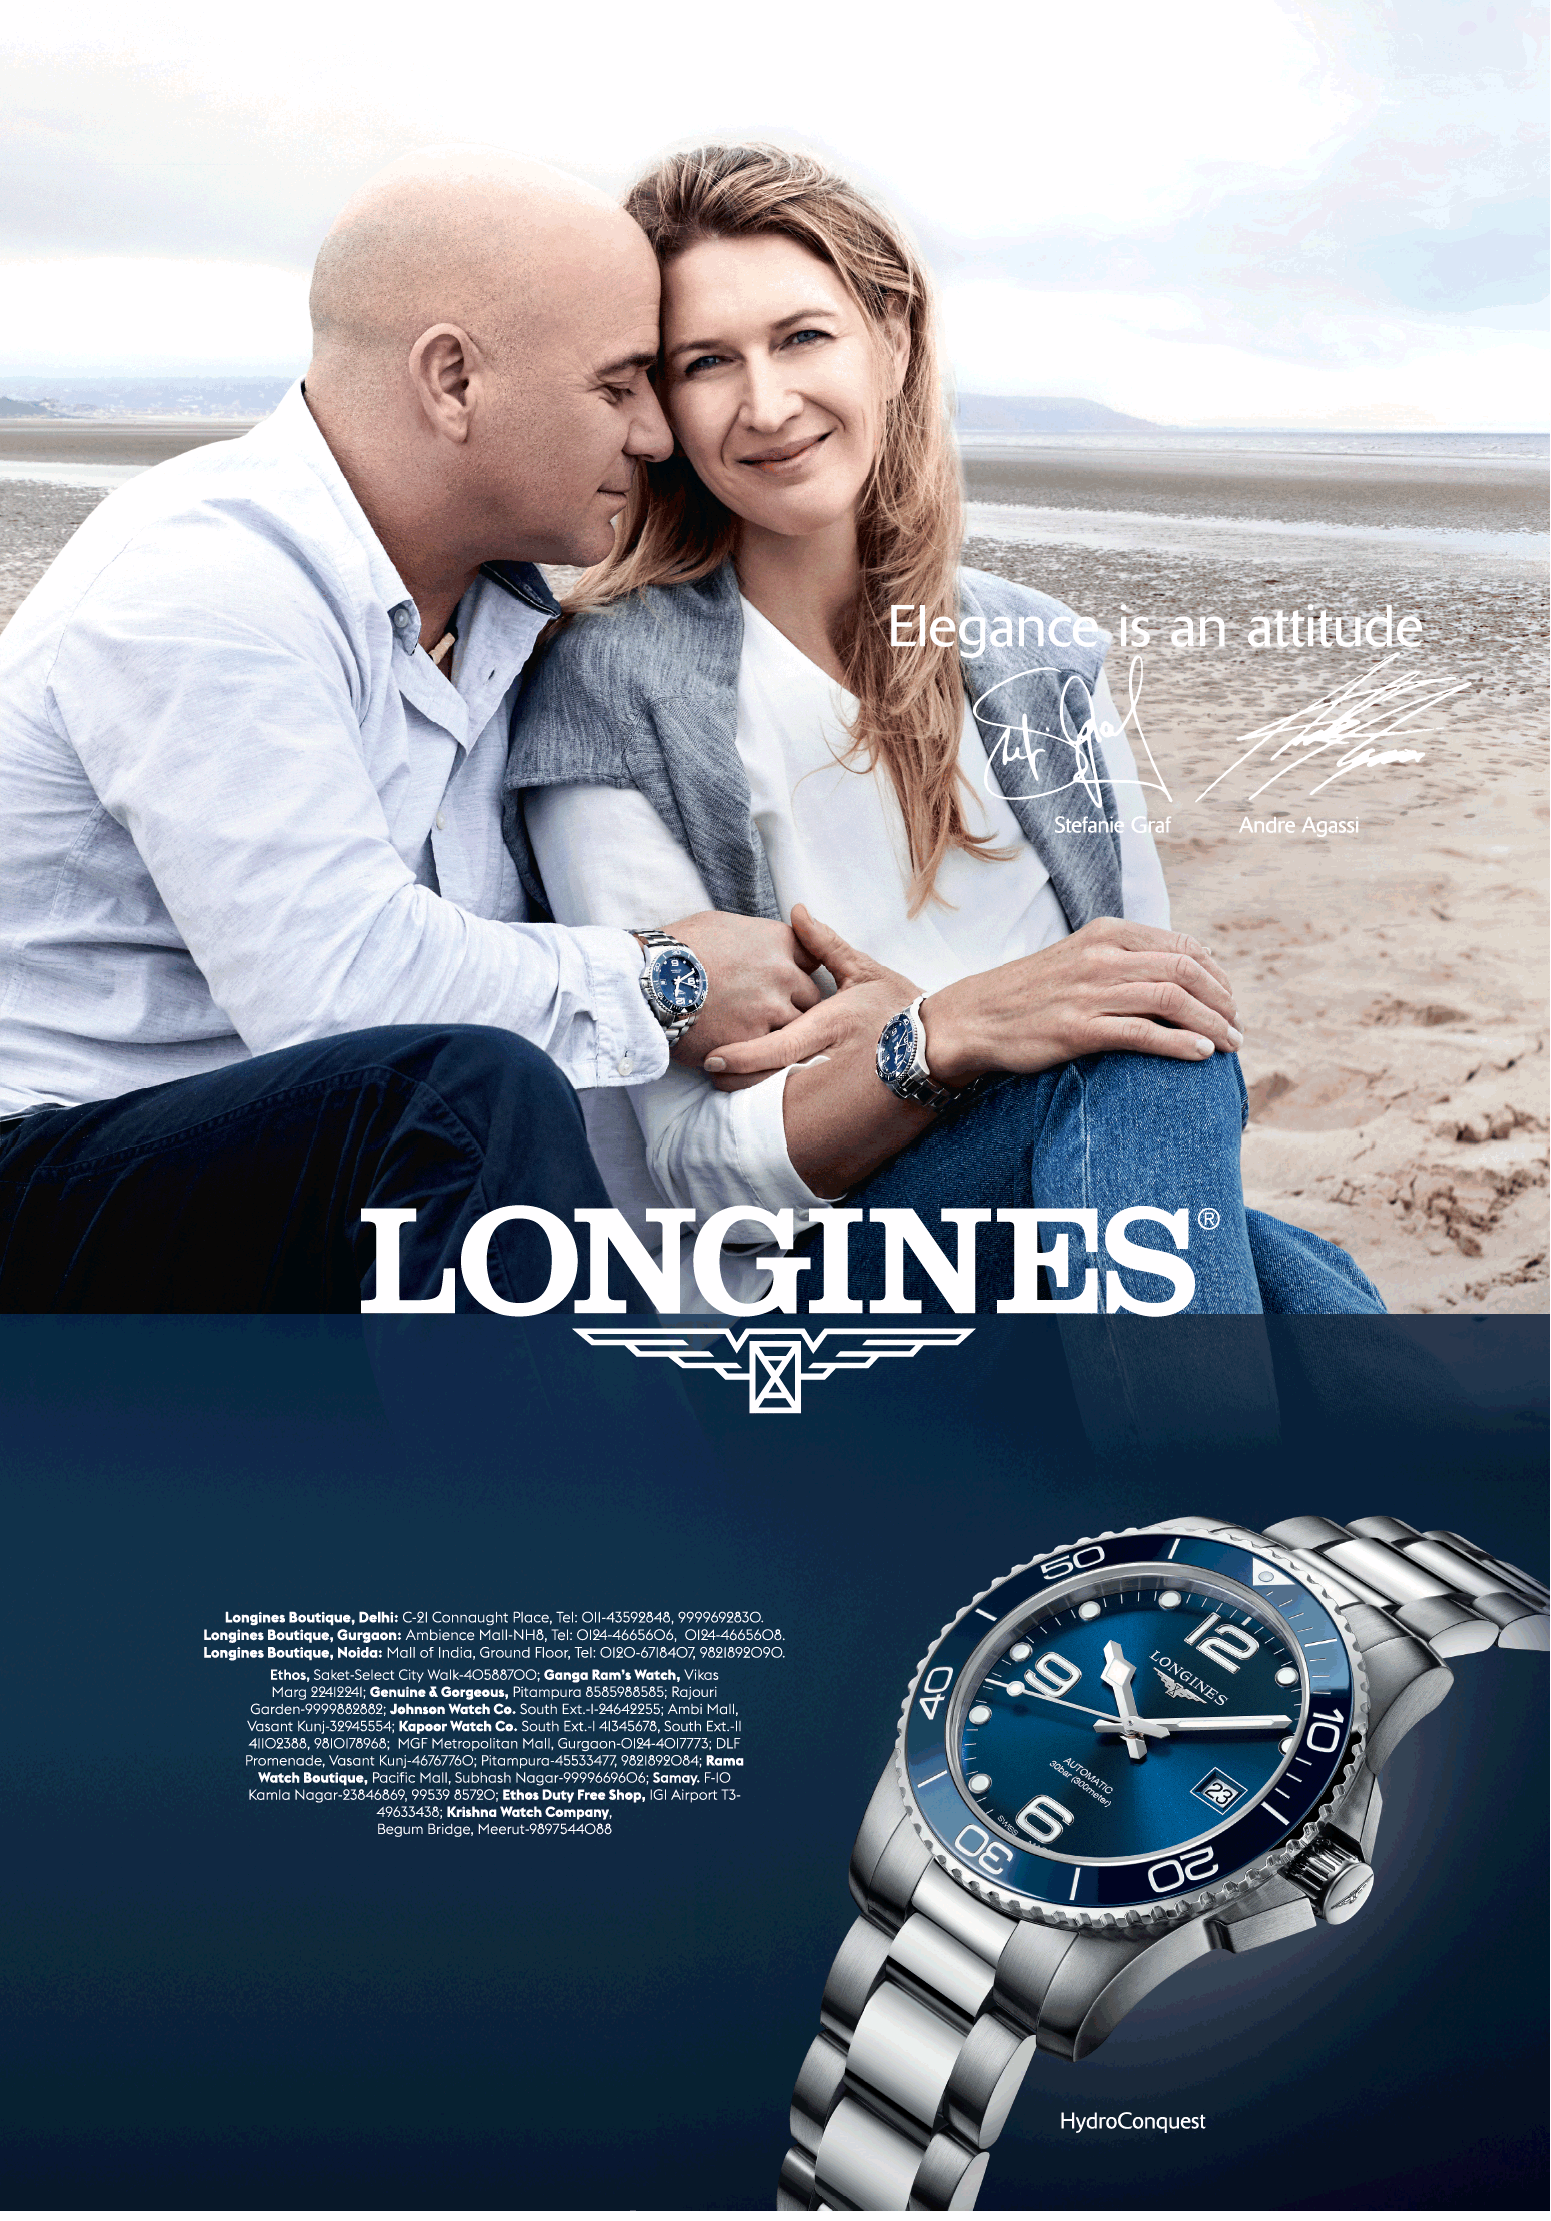 longines-watches-elegance-is-an-attitude-ad-delhi-times-29-08-2019.png